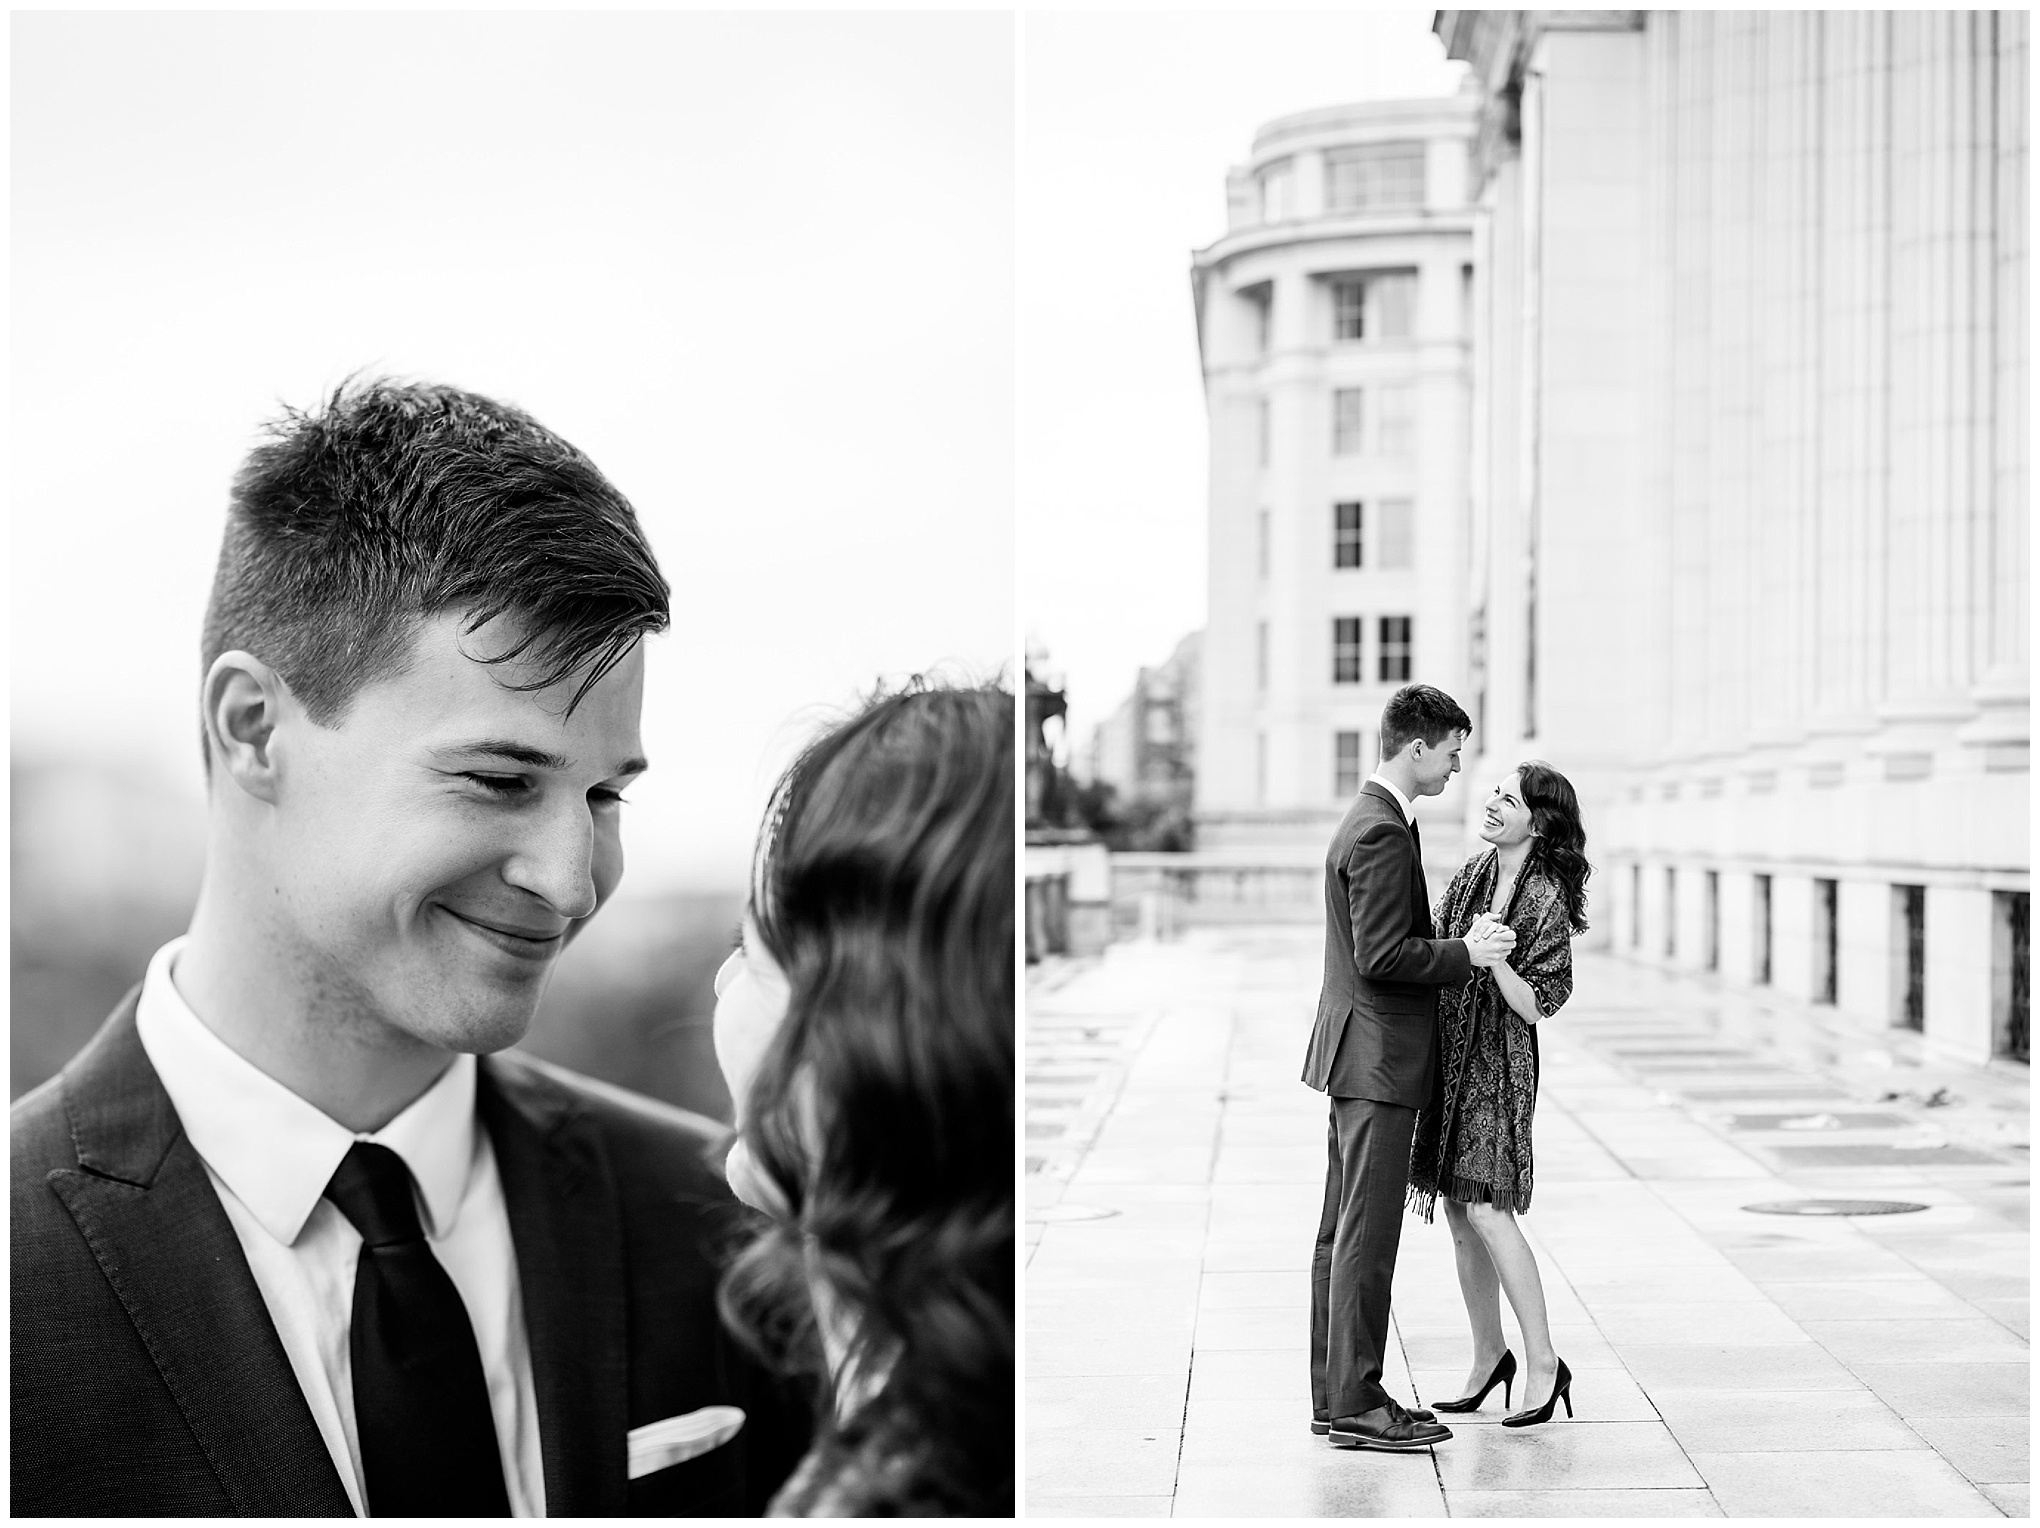 black and white engagement photos, black and white photography, black and white photos, engagement photos, black and white D.C., D.C. engagement photos, classic engagement photos, traditional engagement photos, engagement photos poses, classic architecture, D.C. architecture, Union Station D.C., Union Station, engaged couple, relationship goals, joyful couple, black and white sessions, man smiling at his fiance, fiances, couple dancing